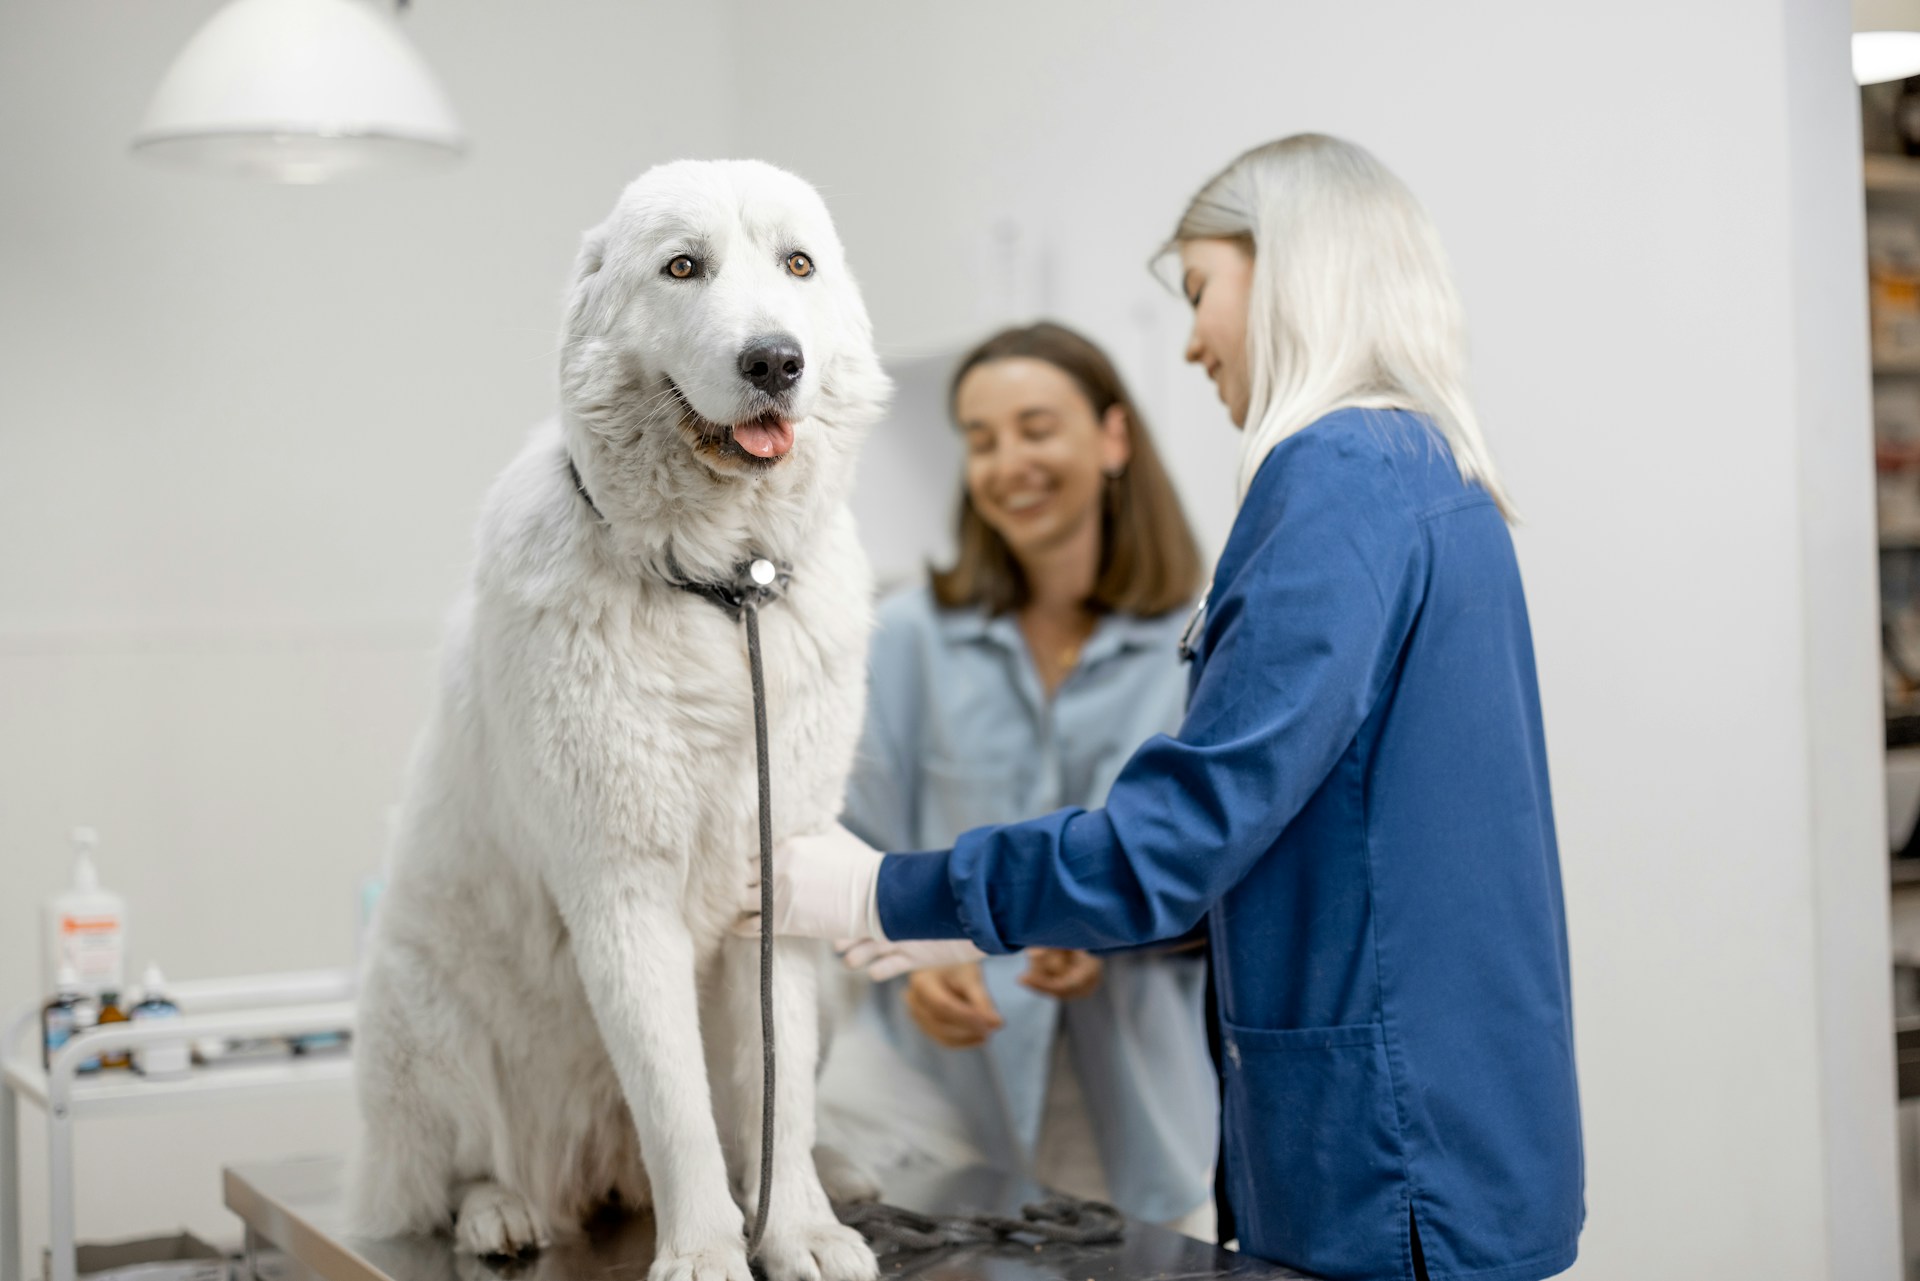 A white dog getting examined at a vet's clinic